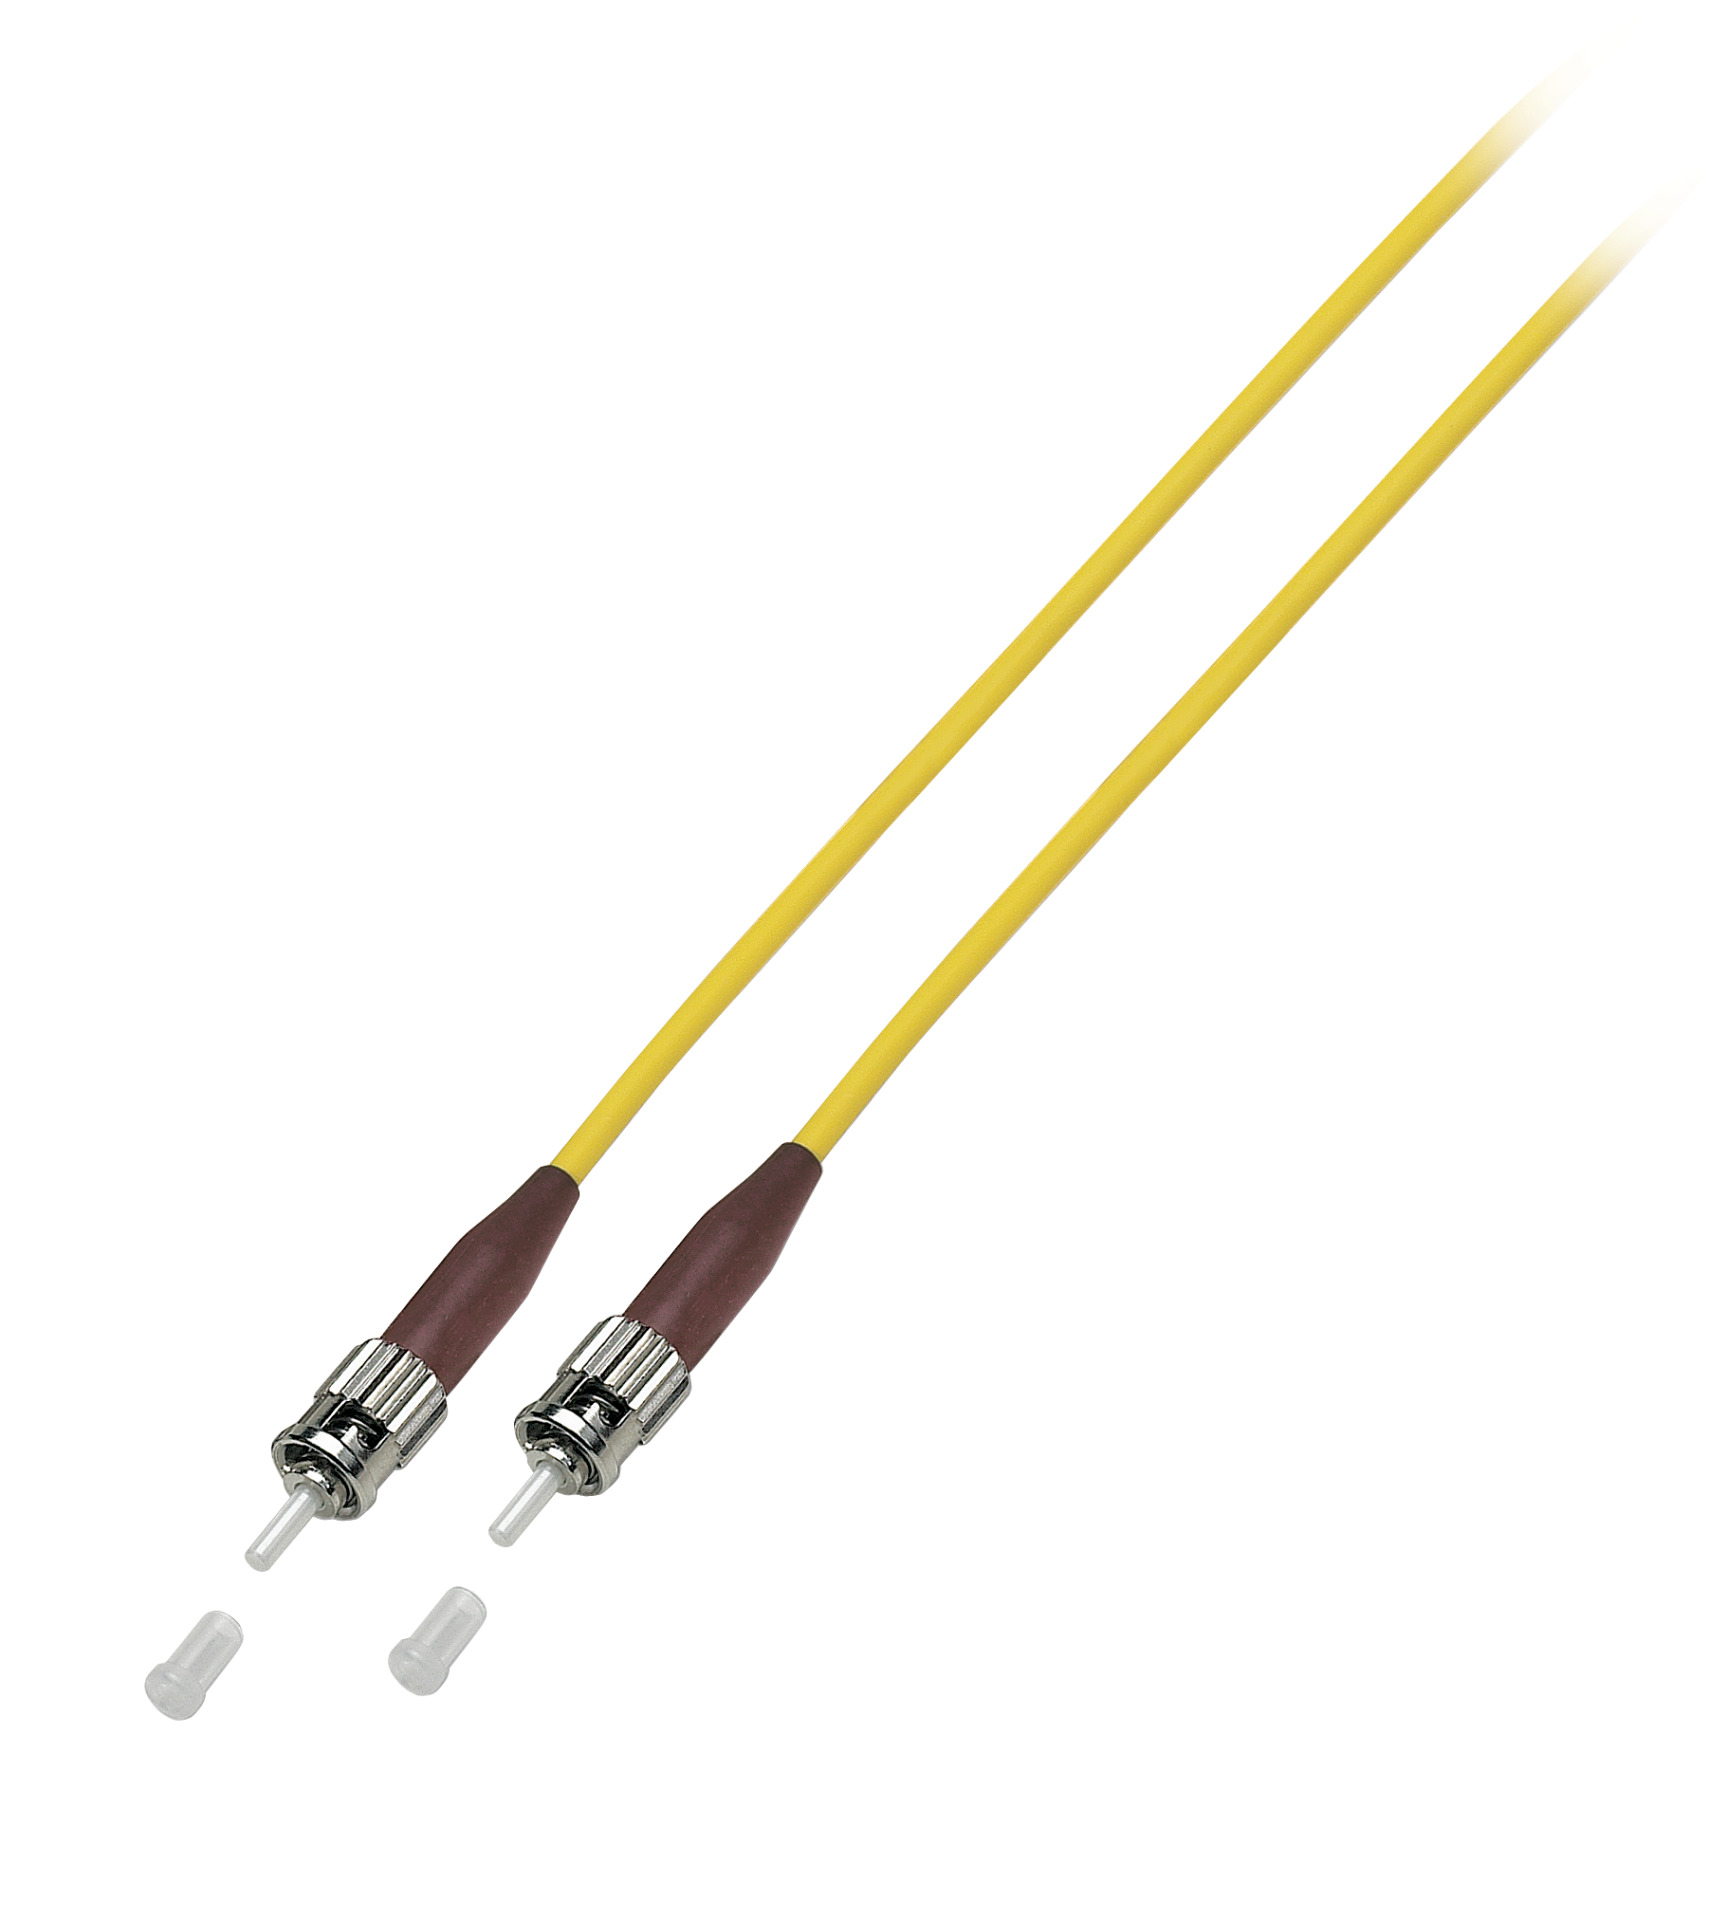 Simplex FO Patch Cable ST-ST G657.A2 5m 3,0mm yellow 9/125µm